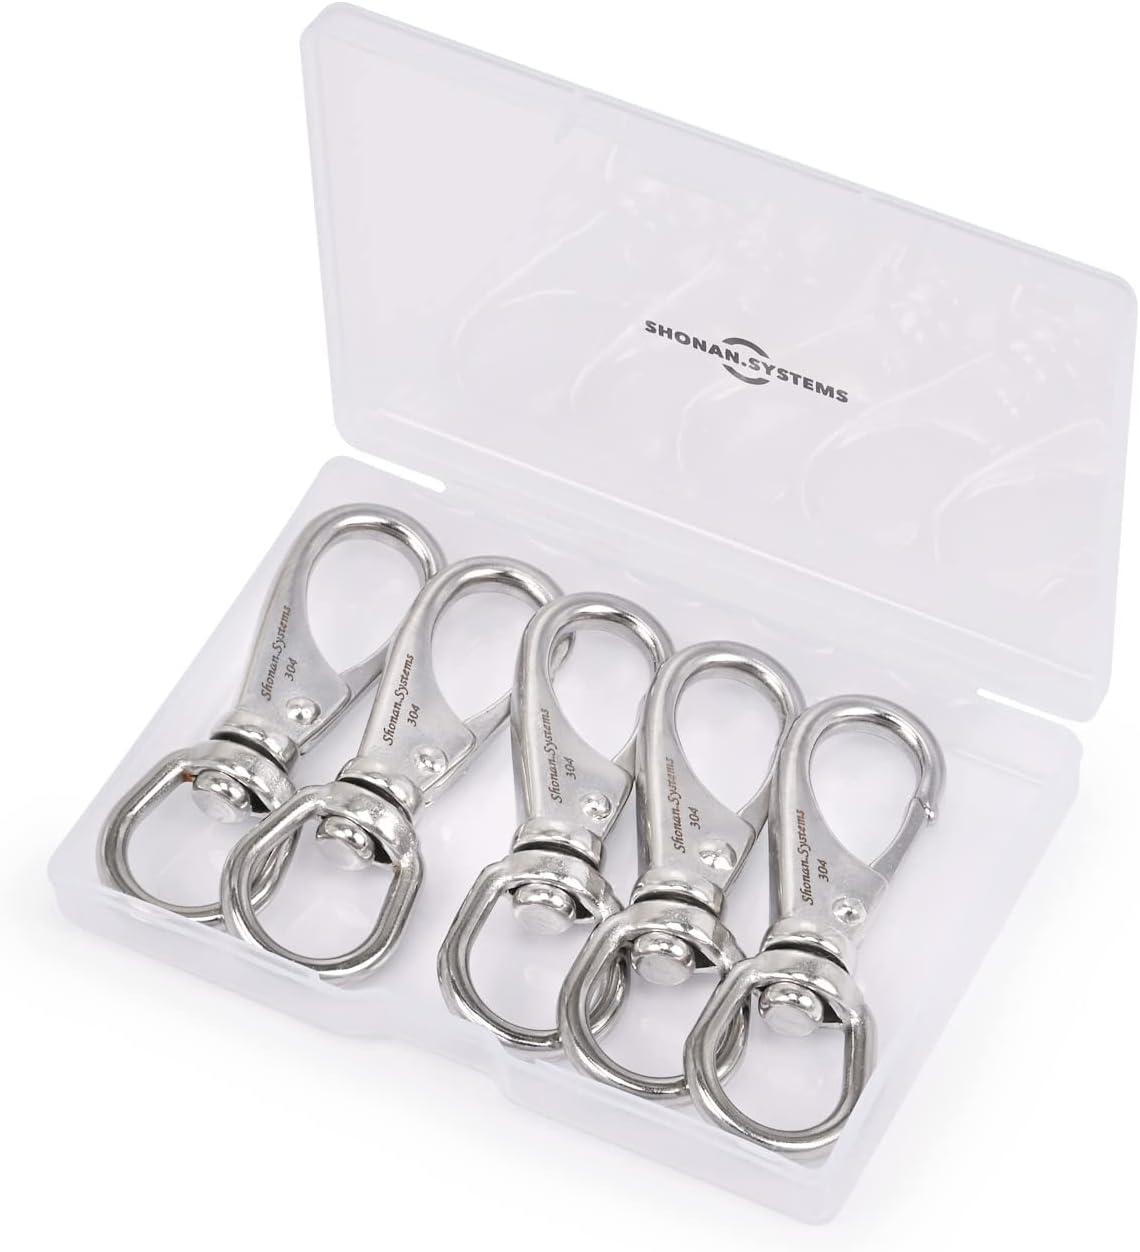 SHONAN 2.7 Inch Swivel Snap Hooks, 5 Pack Small Stainless Steel Spring Clips,  Flag Pole Clips, Scuba Diving Clips Spring Hooks for Dog leashes, Keychains,  Bird Feeders, Pet Chains and More